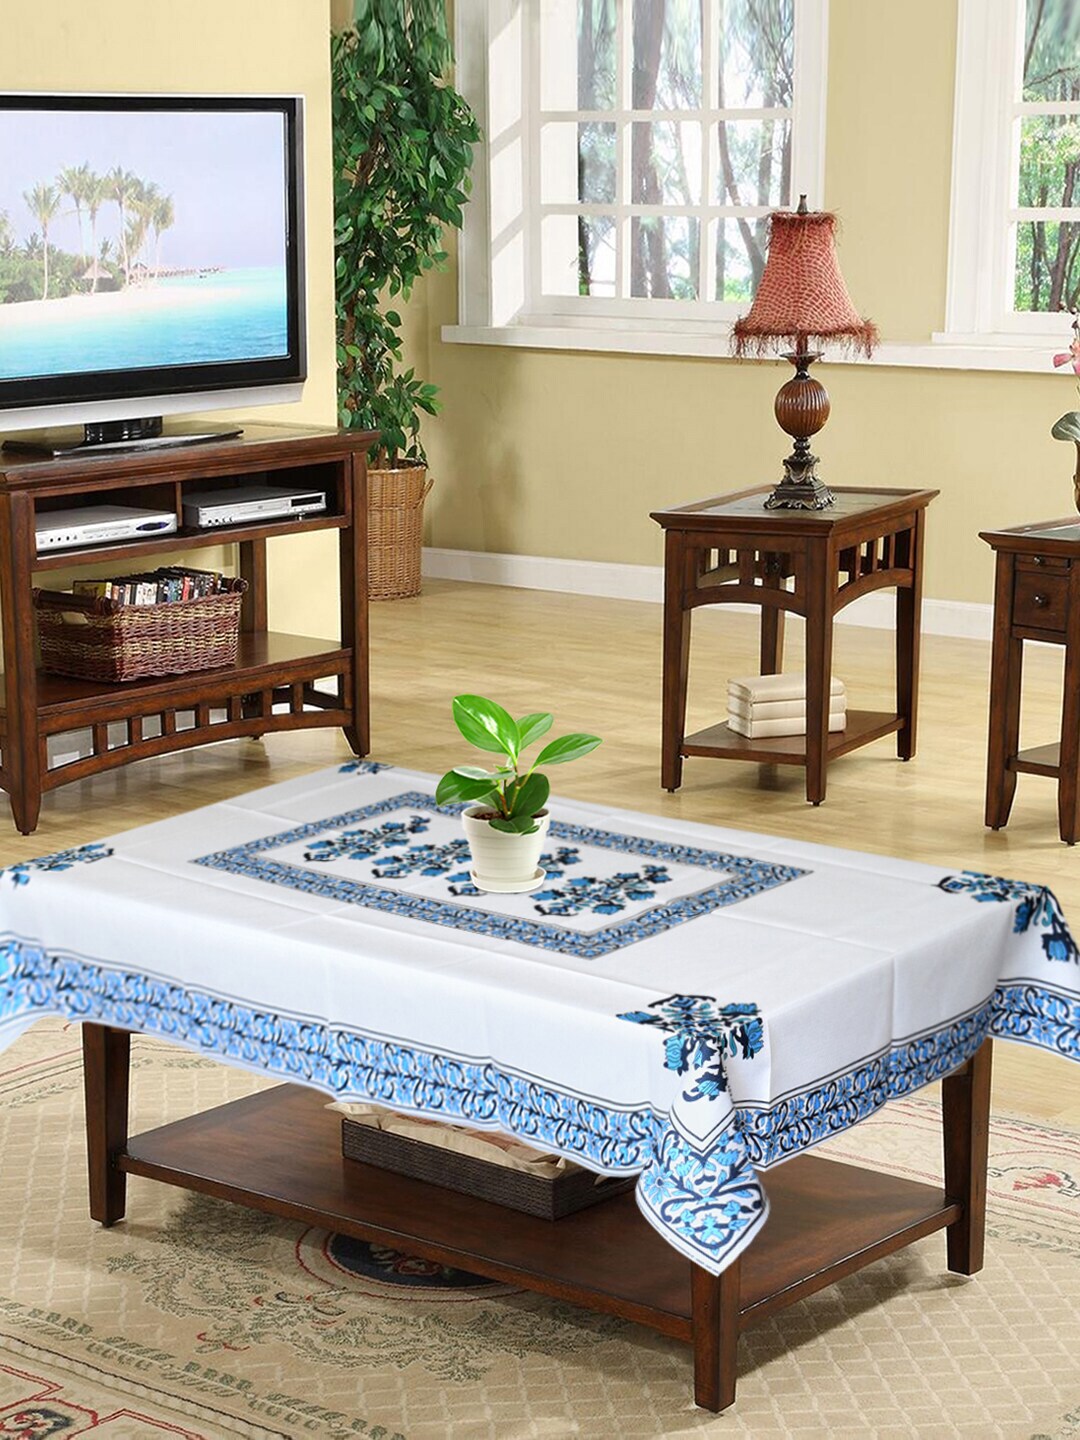 Kuber Industries Blue & White Floral Printed 4-Seater Table Covers Price in India